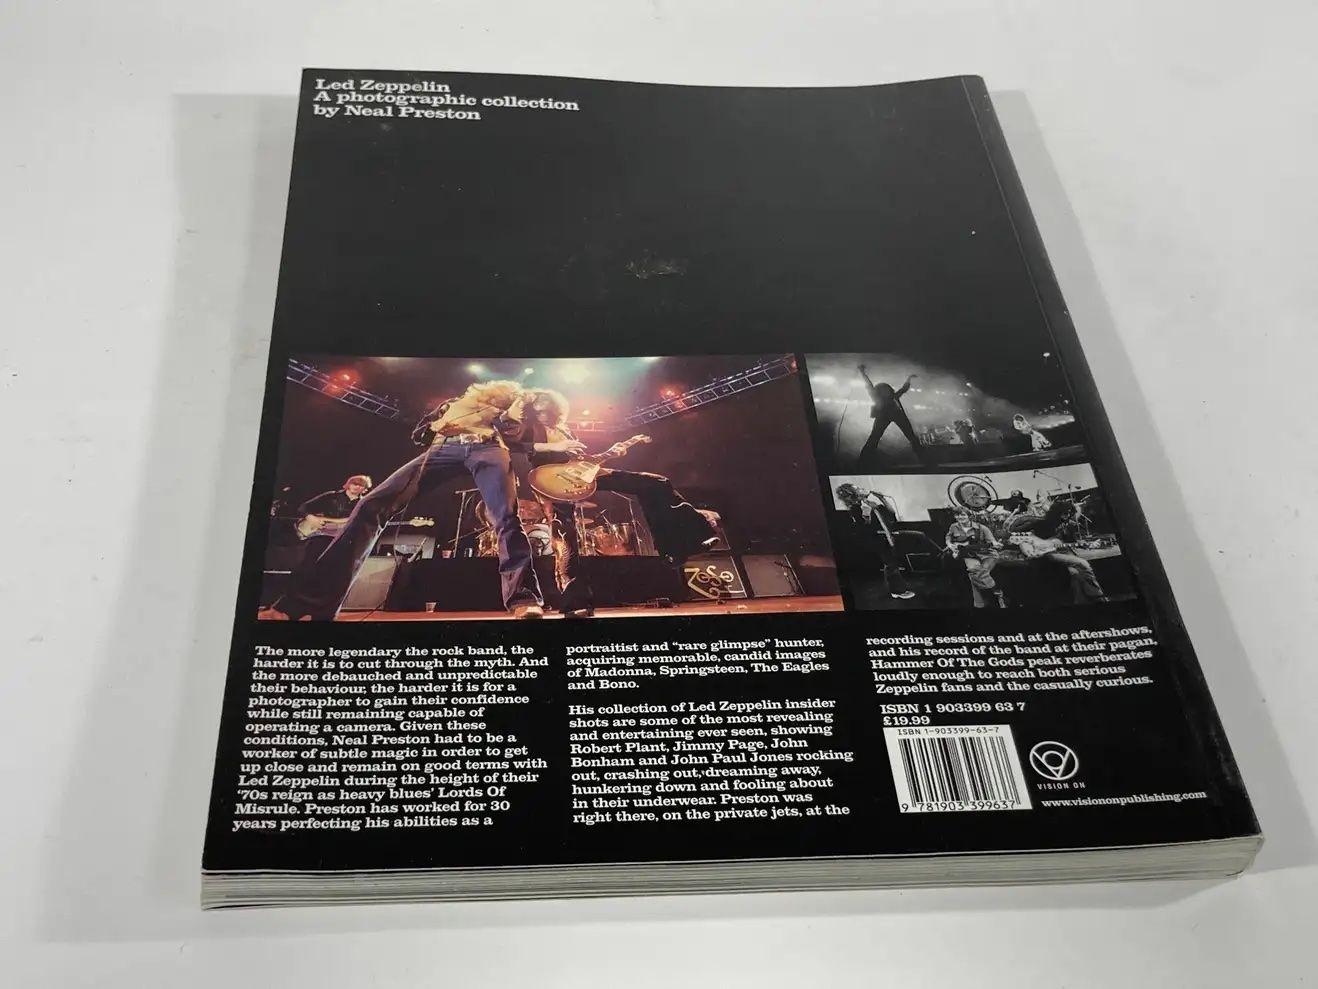 Modern Led Zeppelin a Photographic Collection Book by Neal Preston For Sale